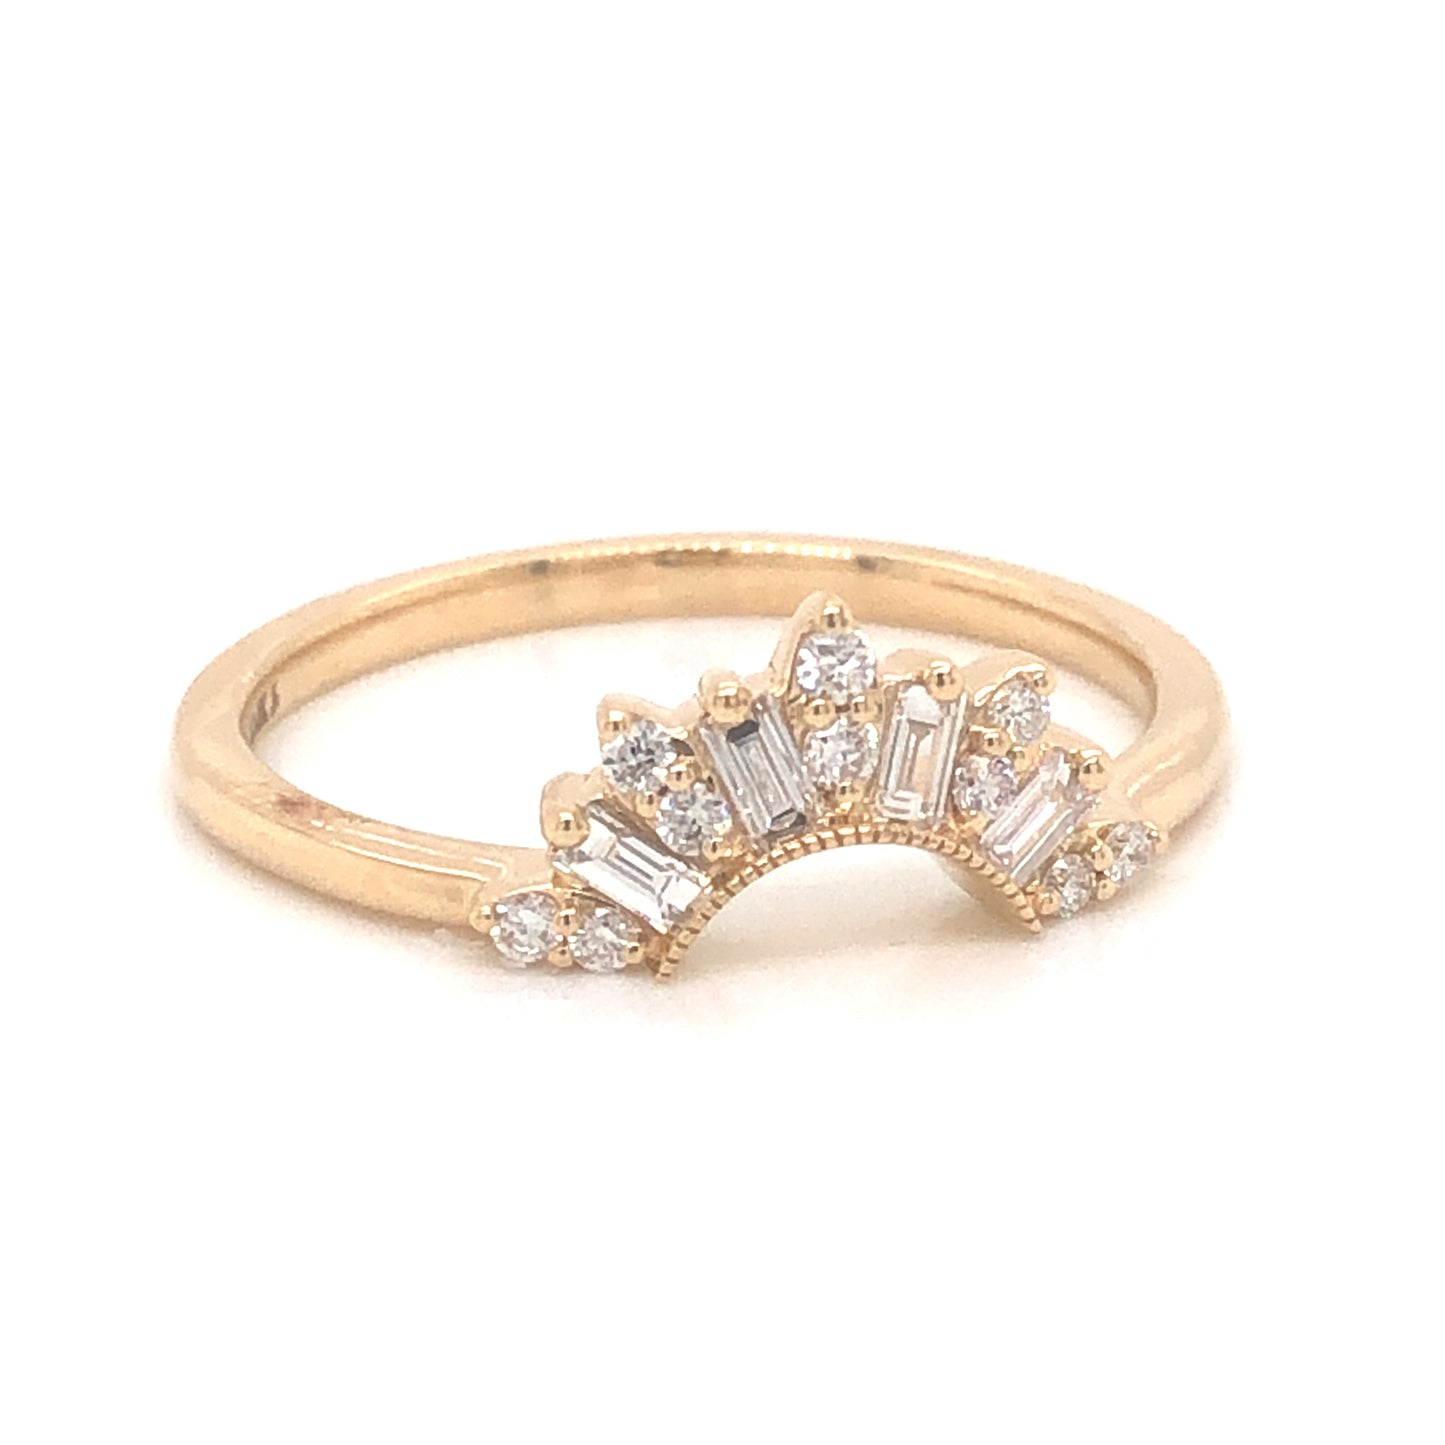 .31 Diamond Curved Wedding Band in 14k Yellow Gold